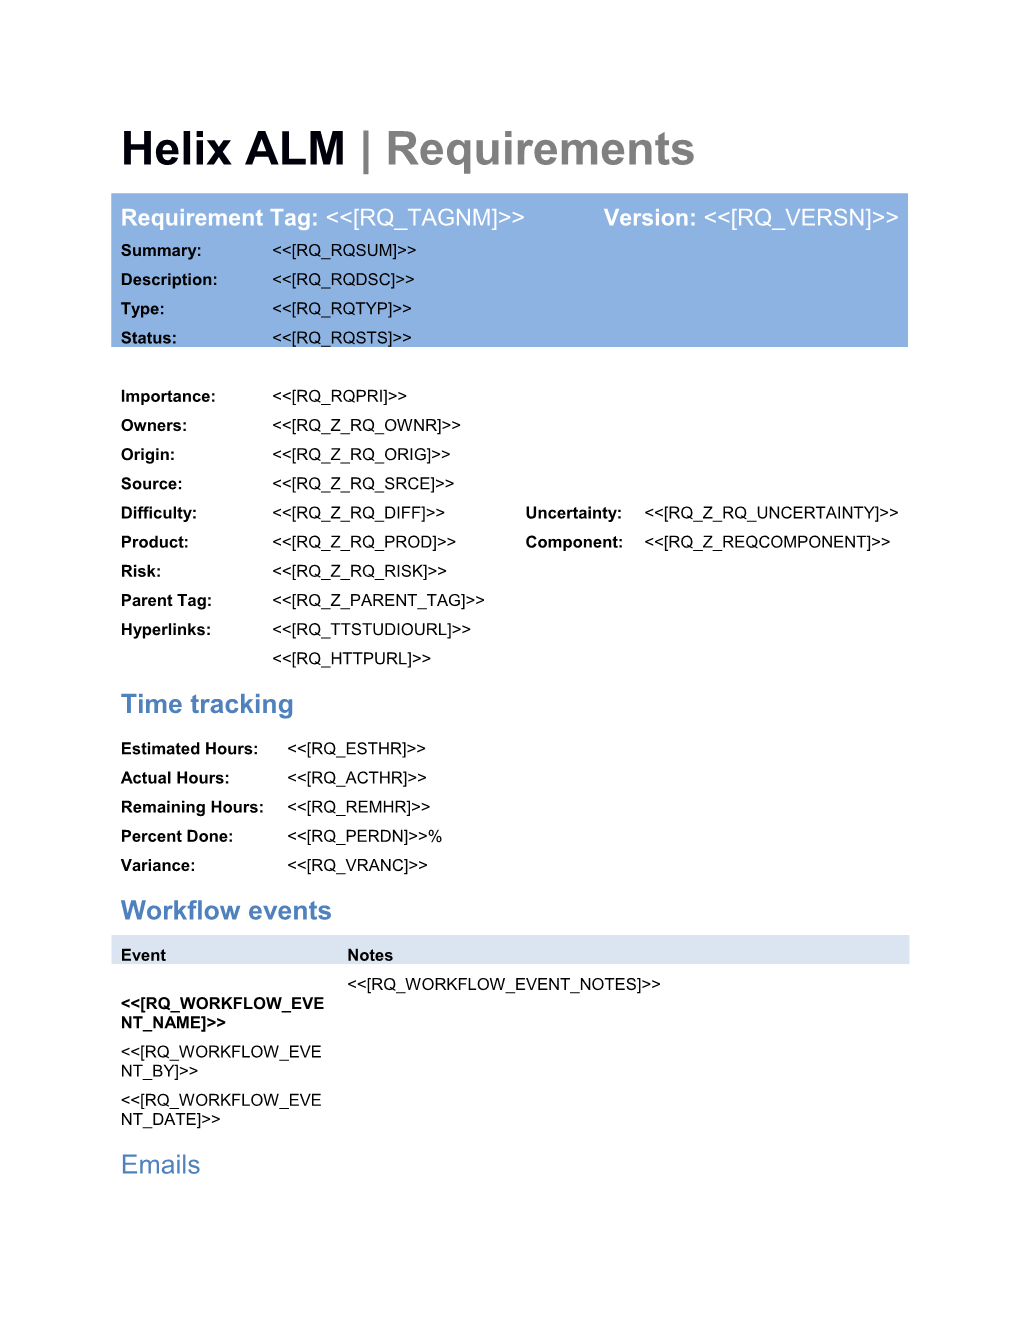 Helix ALM Requirements